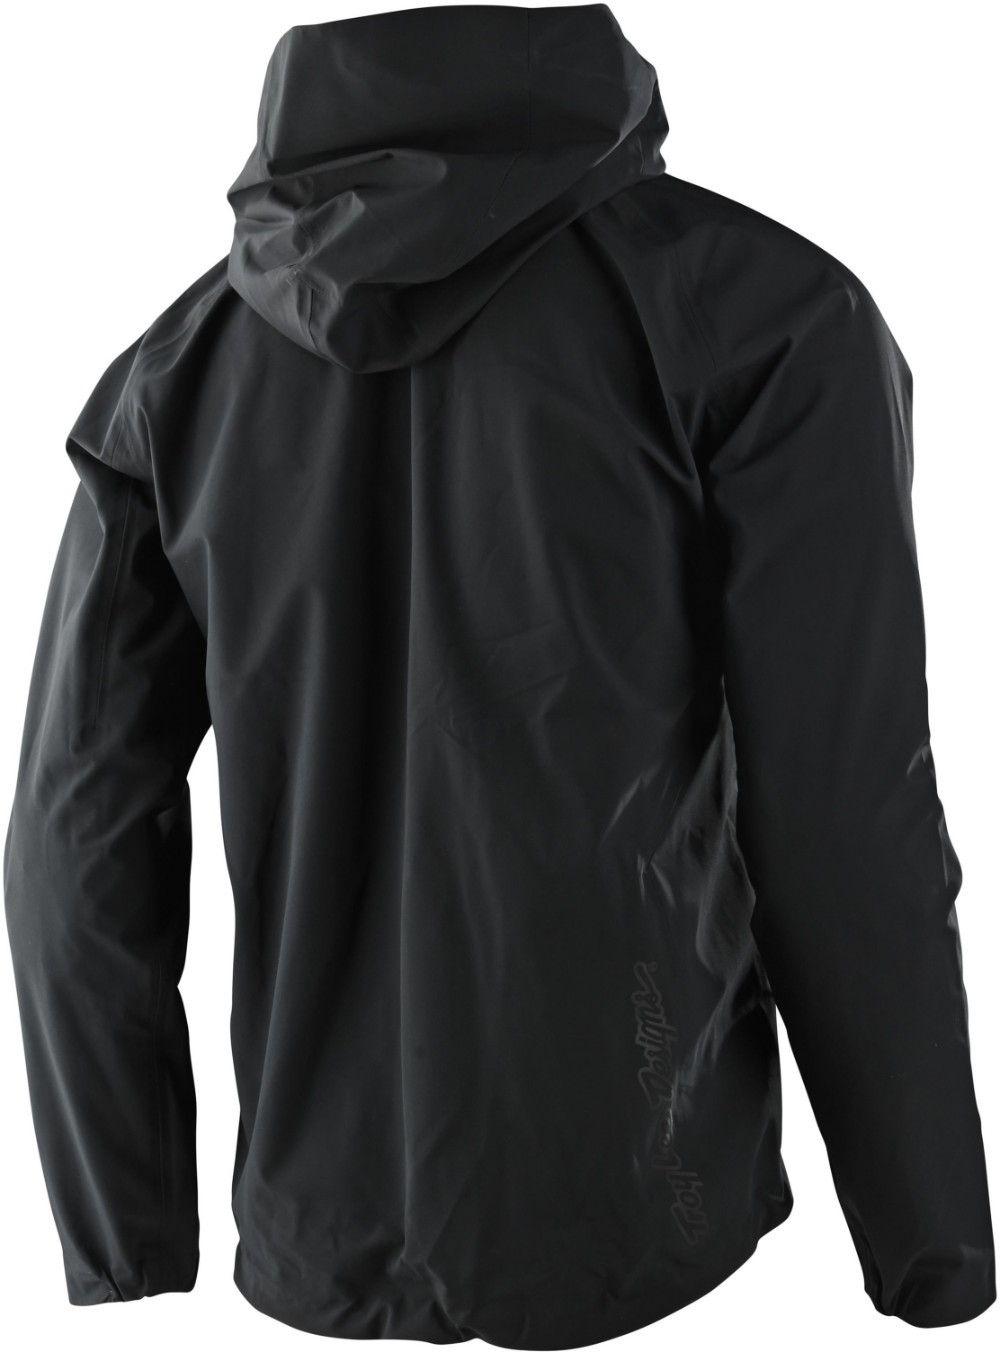 Descent Waterproof Cycling Jacket image 1